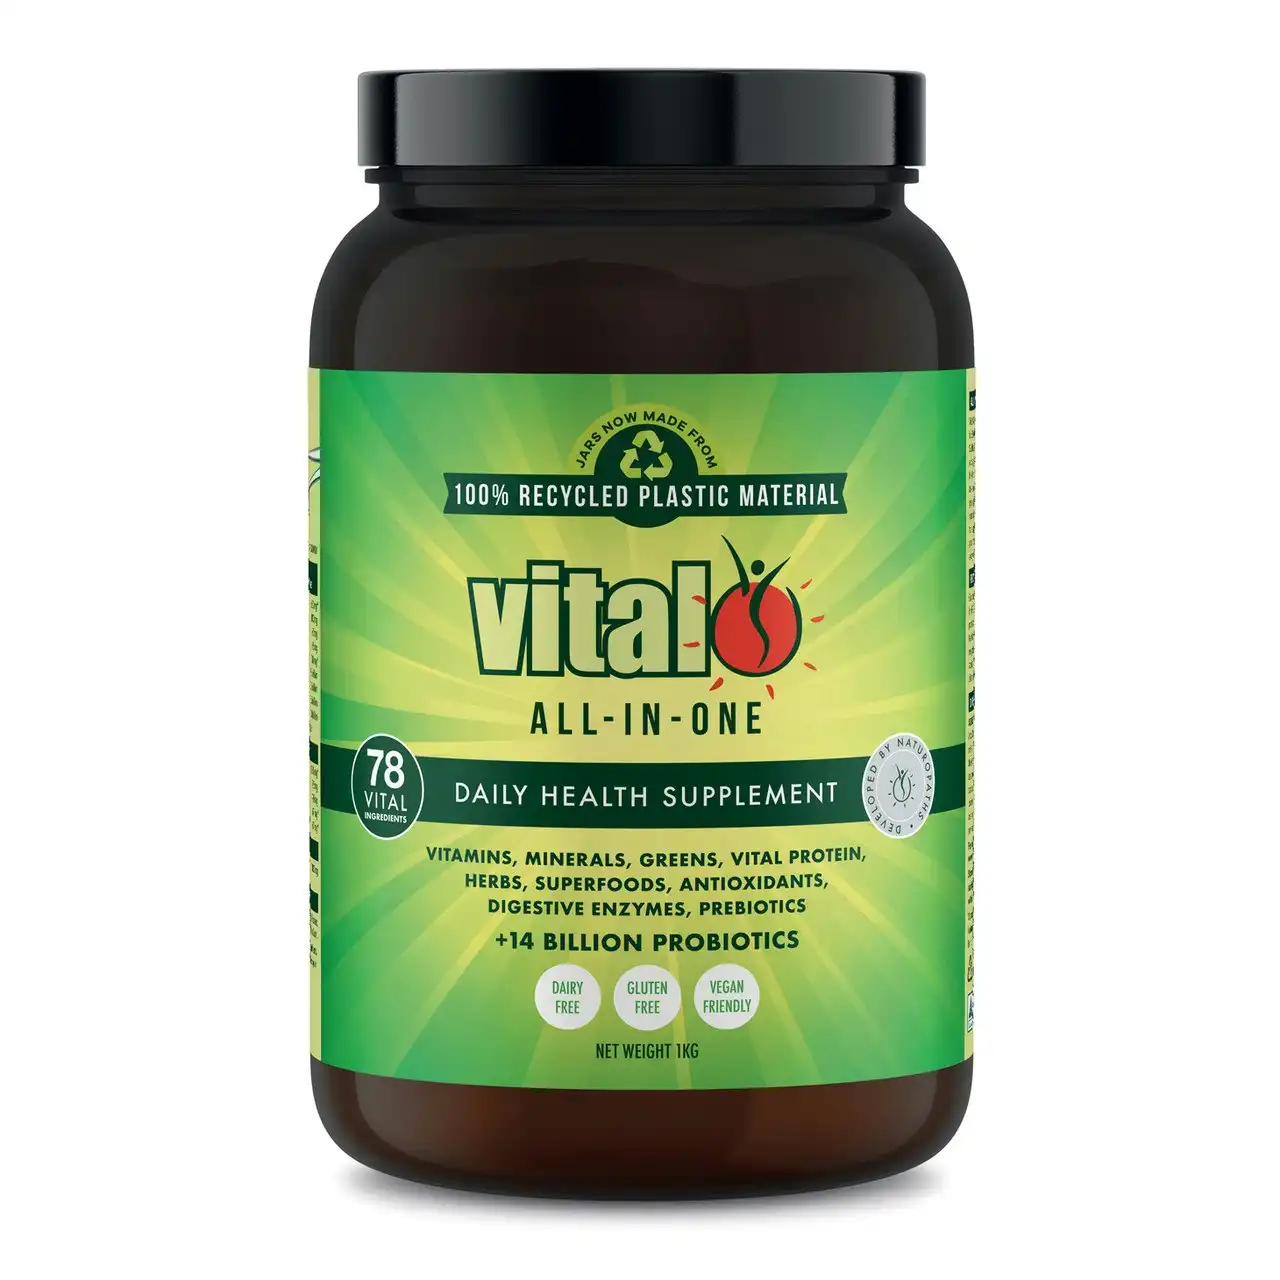 Vital All-In-One Daily Health Supplement 1kg